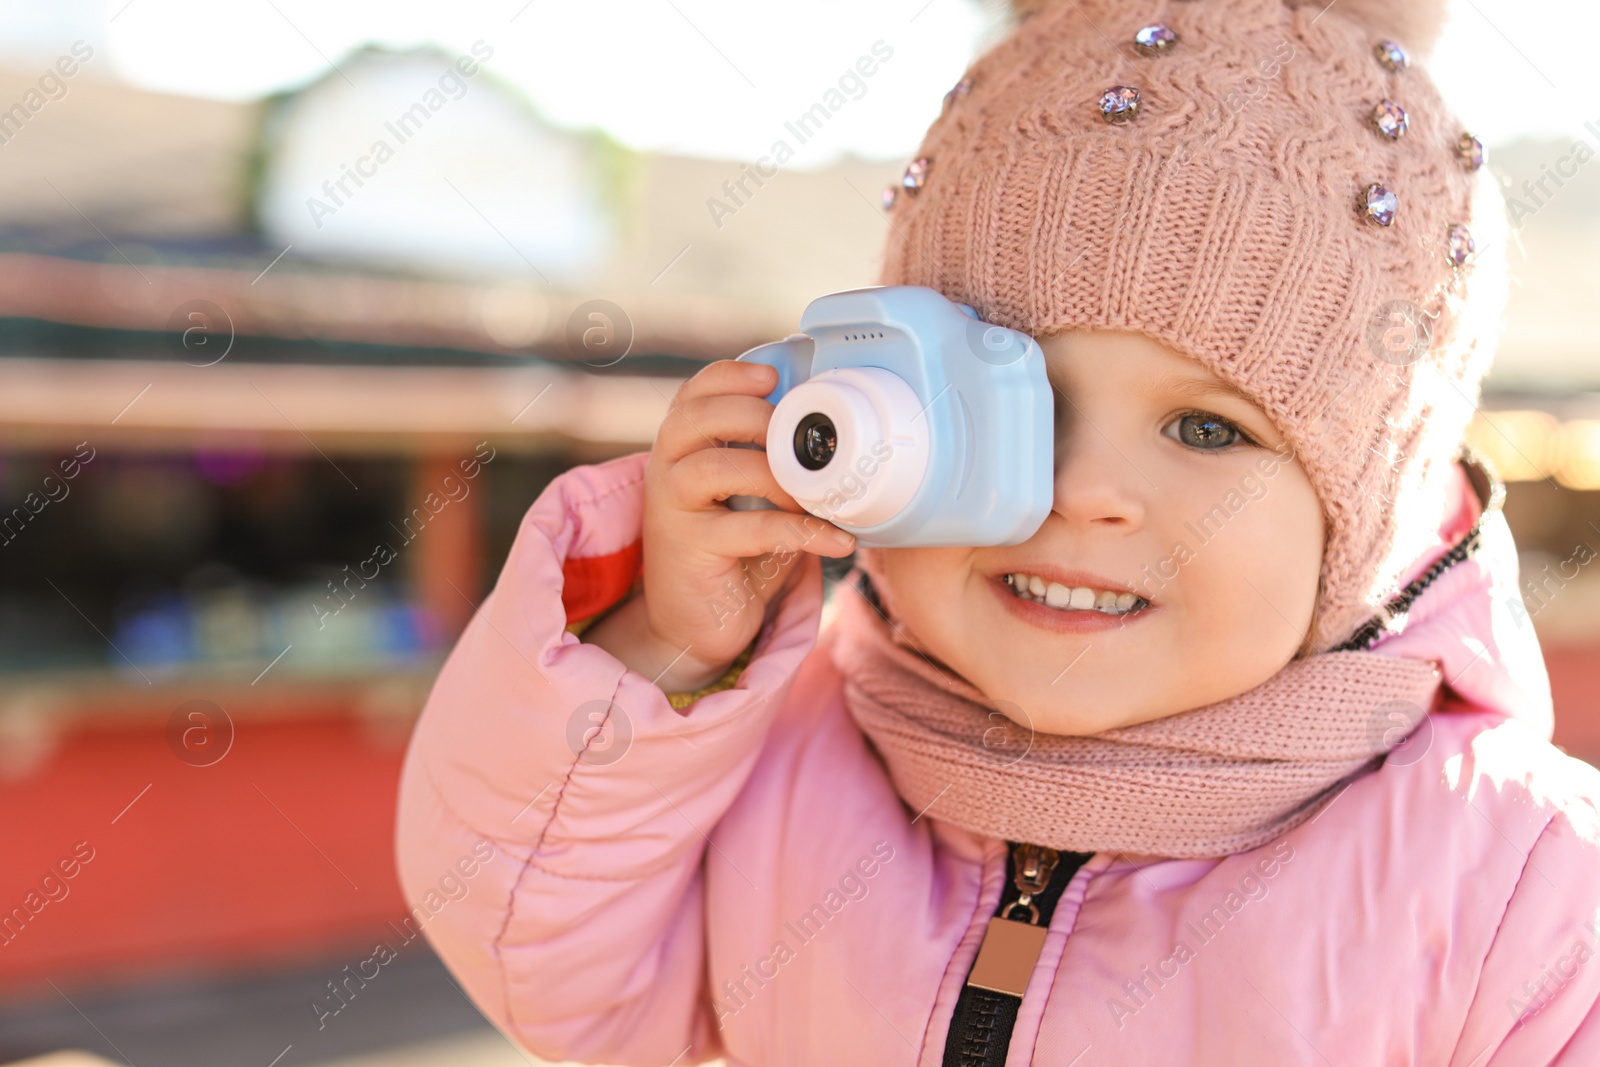 Photo of Little photographer taking picture with toy camera outdoors